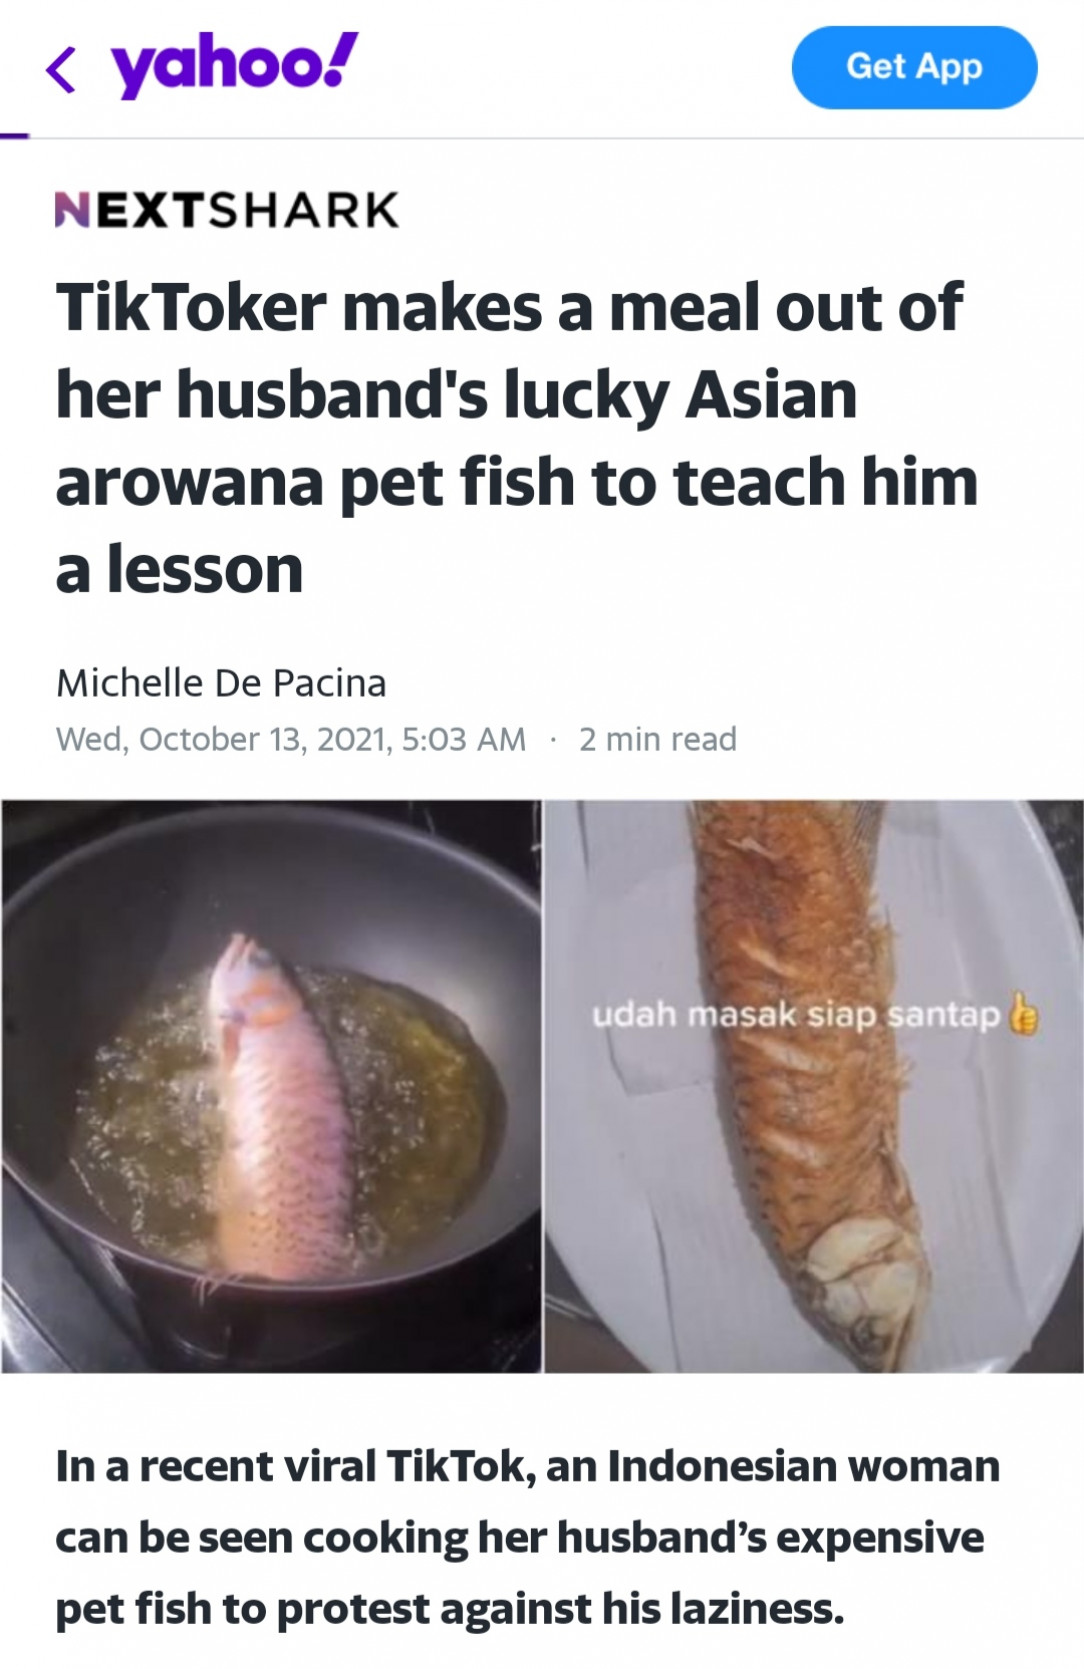 Cooking $300k Pet fish for a lesson